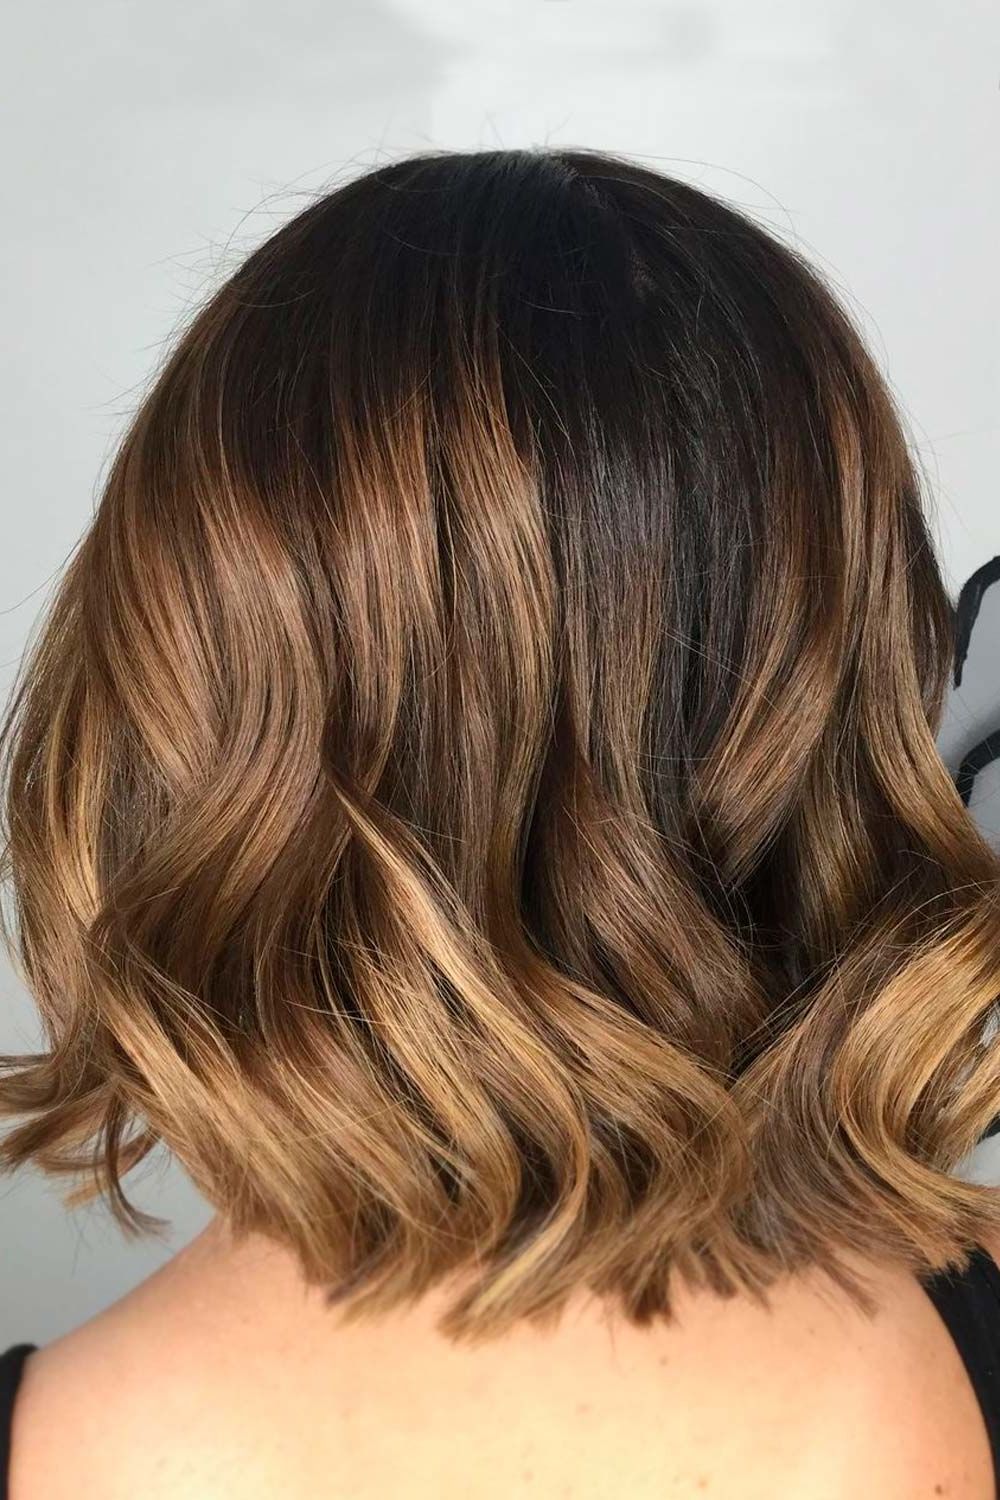 Untraditional Lob Haircut Ideas To Give A Try | Lovehairstyles Intended For Best And Newest Wavy Chocolate Lob Haircuts (View 5 of 25)